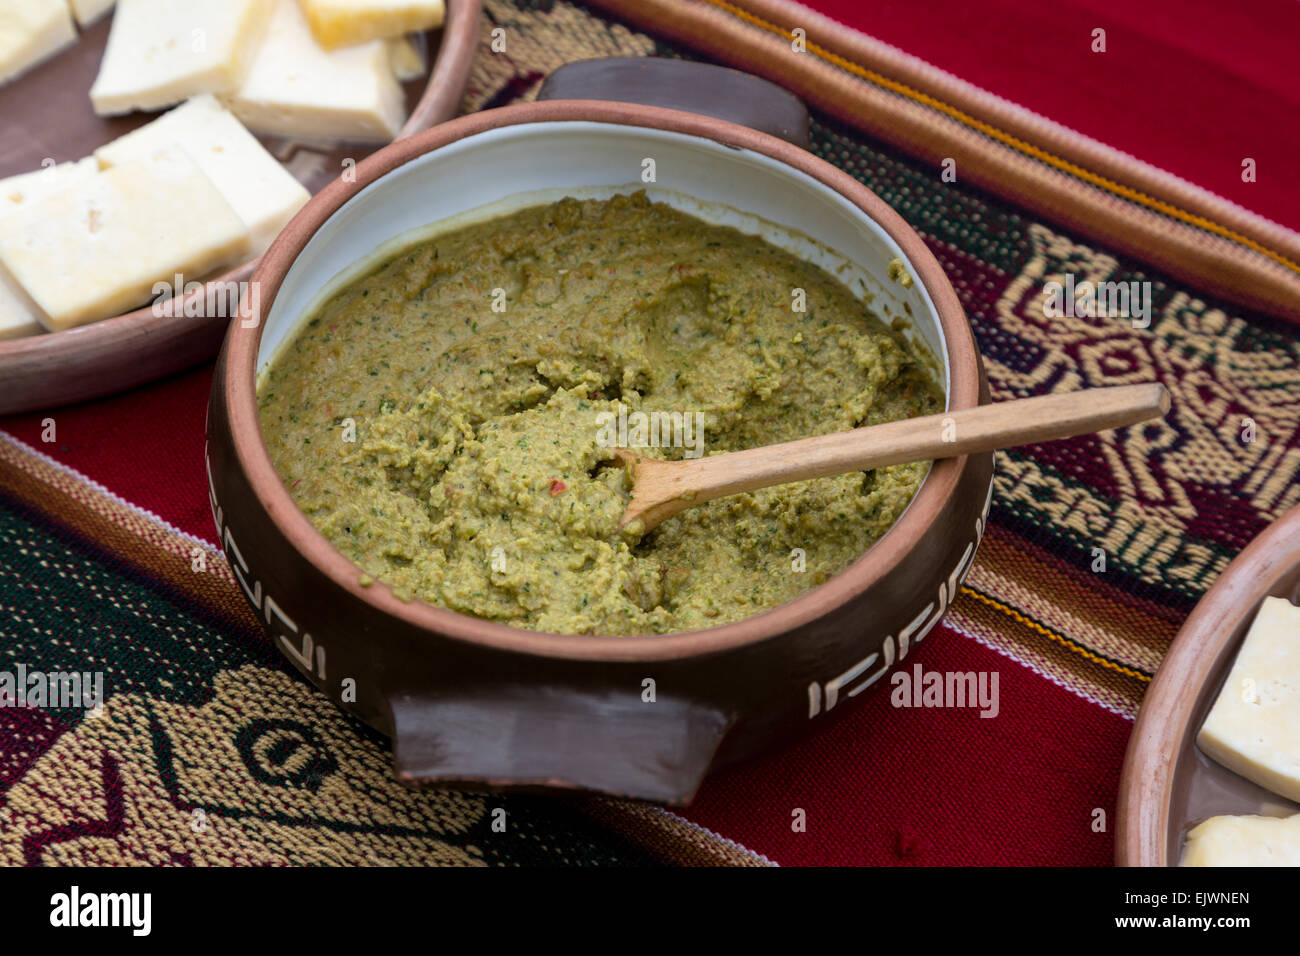 Peru, Urubamba Valley, Quechua Village, Misminay.  Huacatay, a salsa or paste eaten on bread or chips, used in Peruvian cooking. Stock Photo